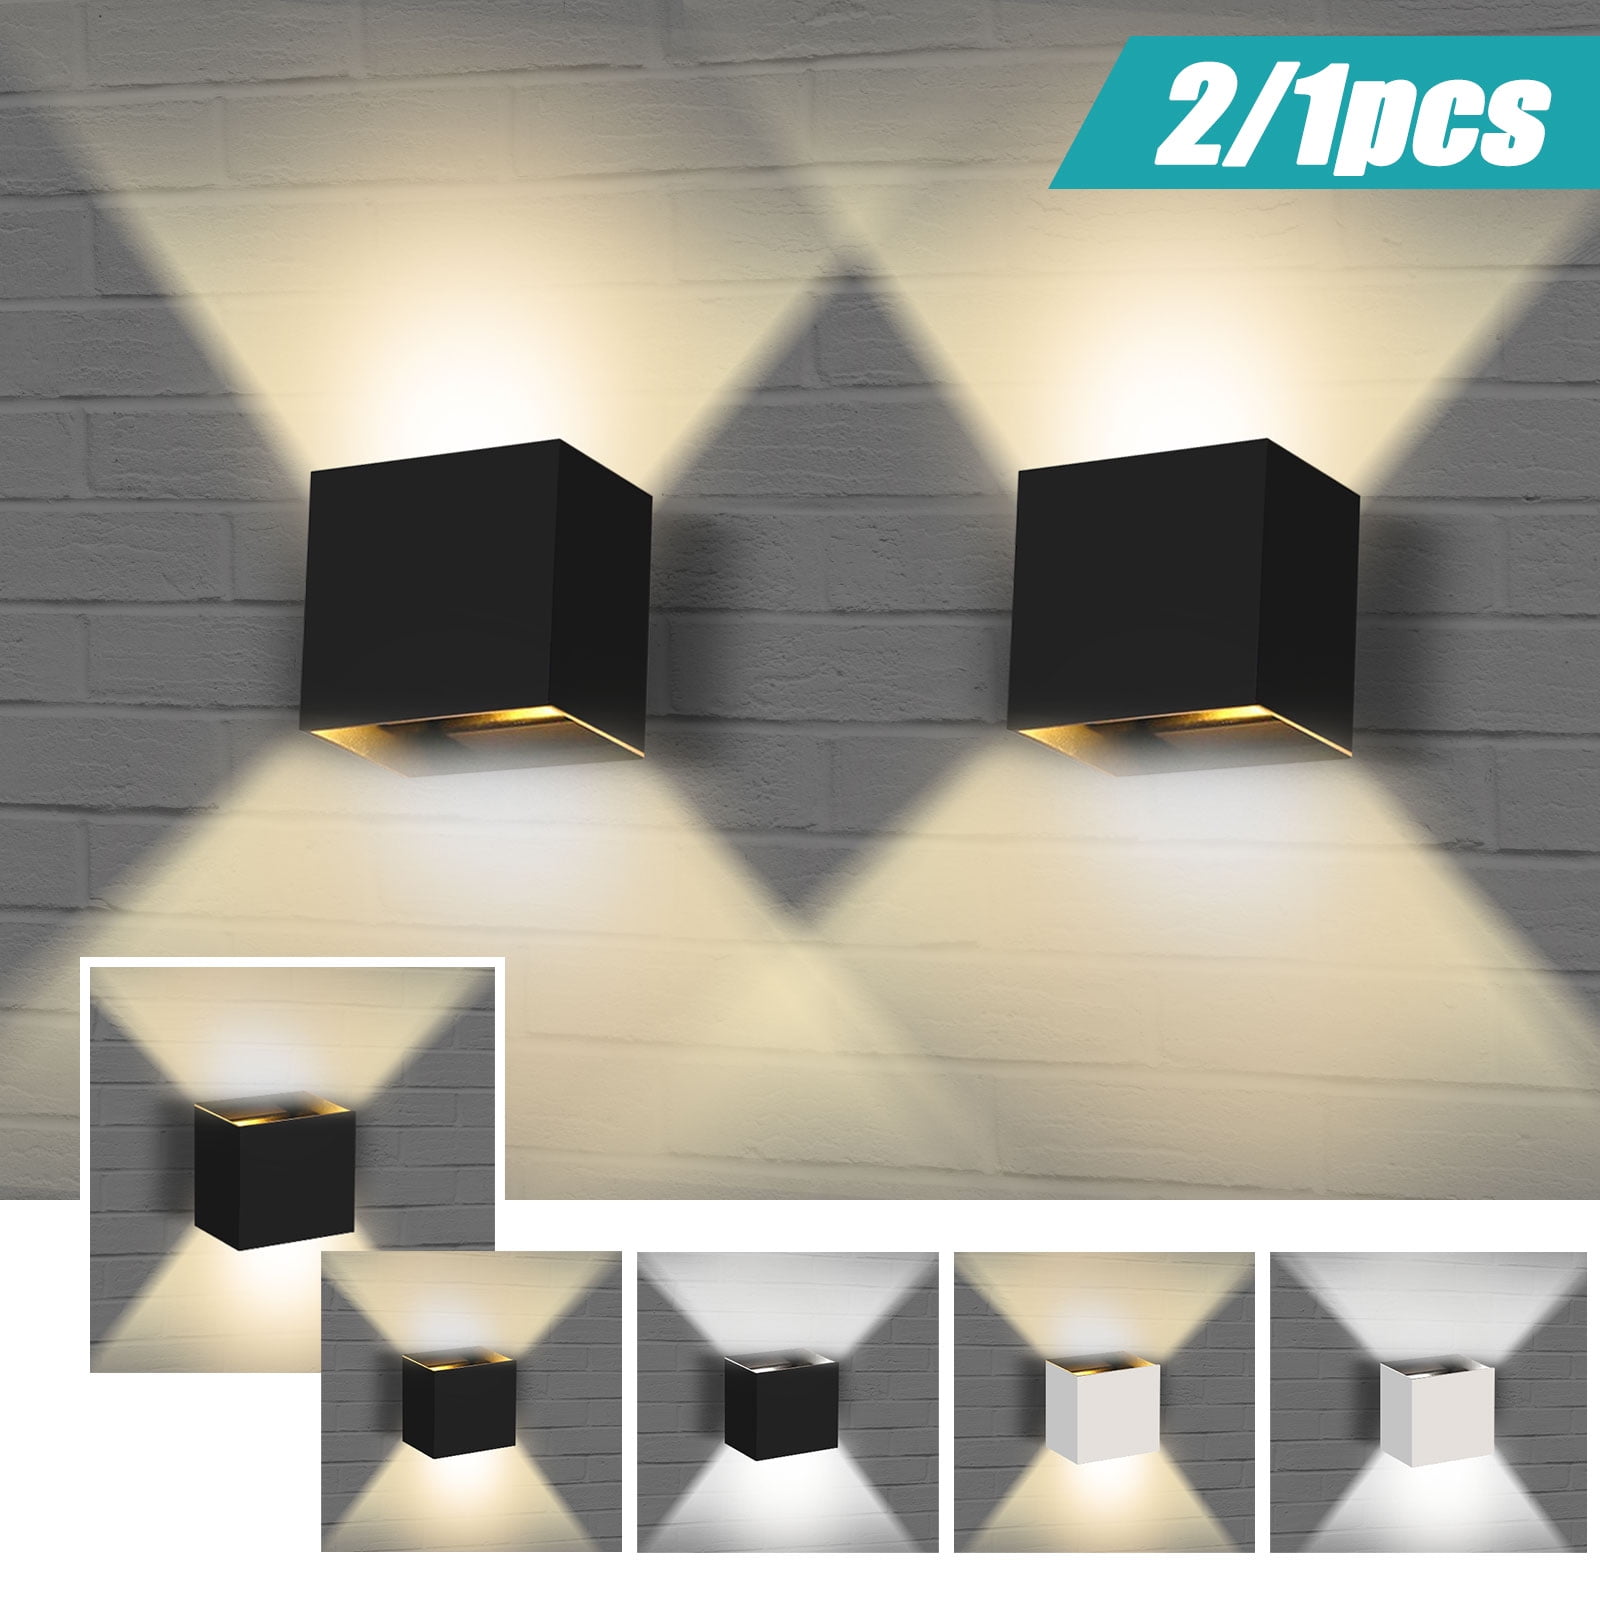 Modern LED Wall Light Up Down Cube Sconce Lighting Lamp Fixture Mount Room Decor 